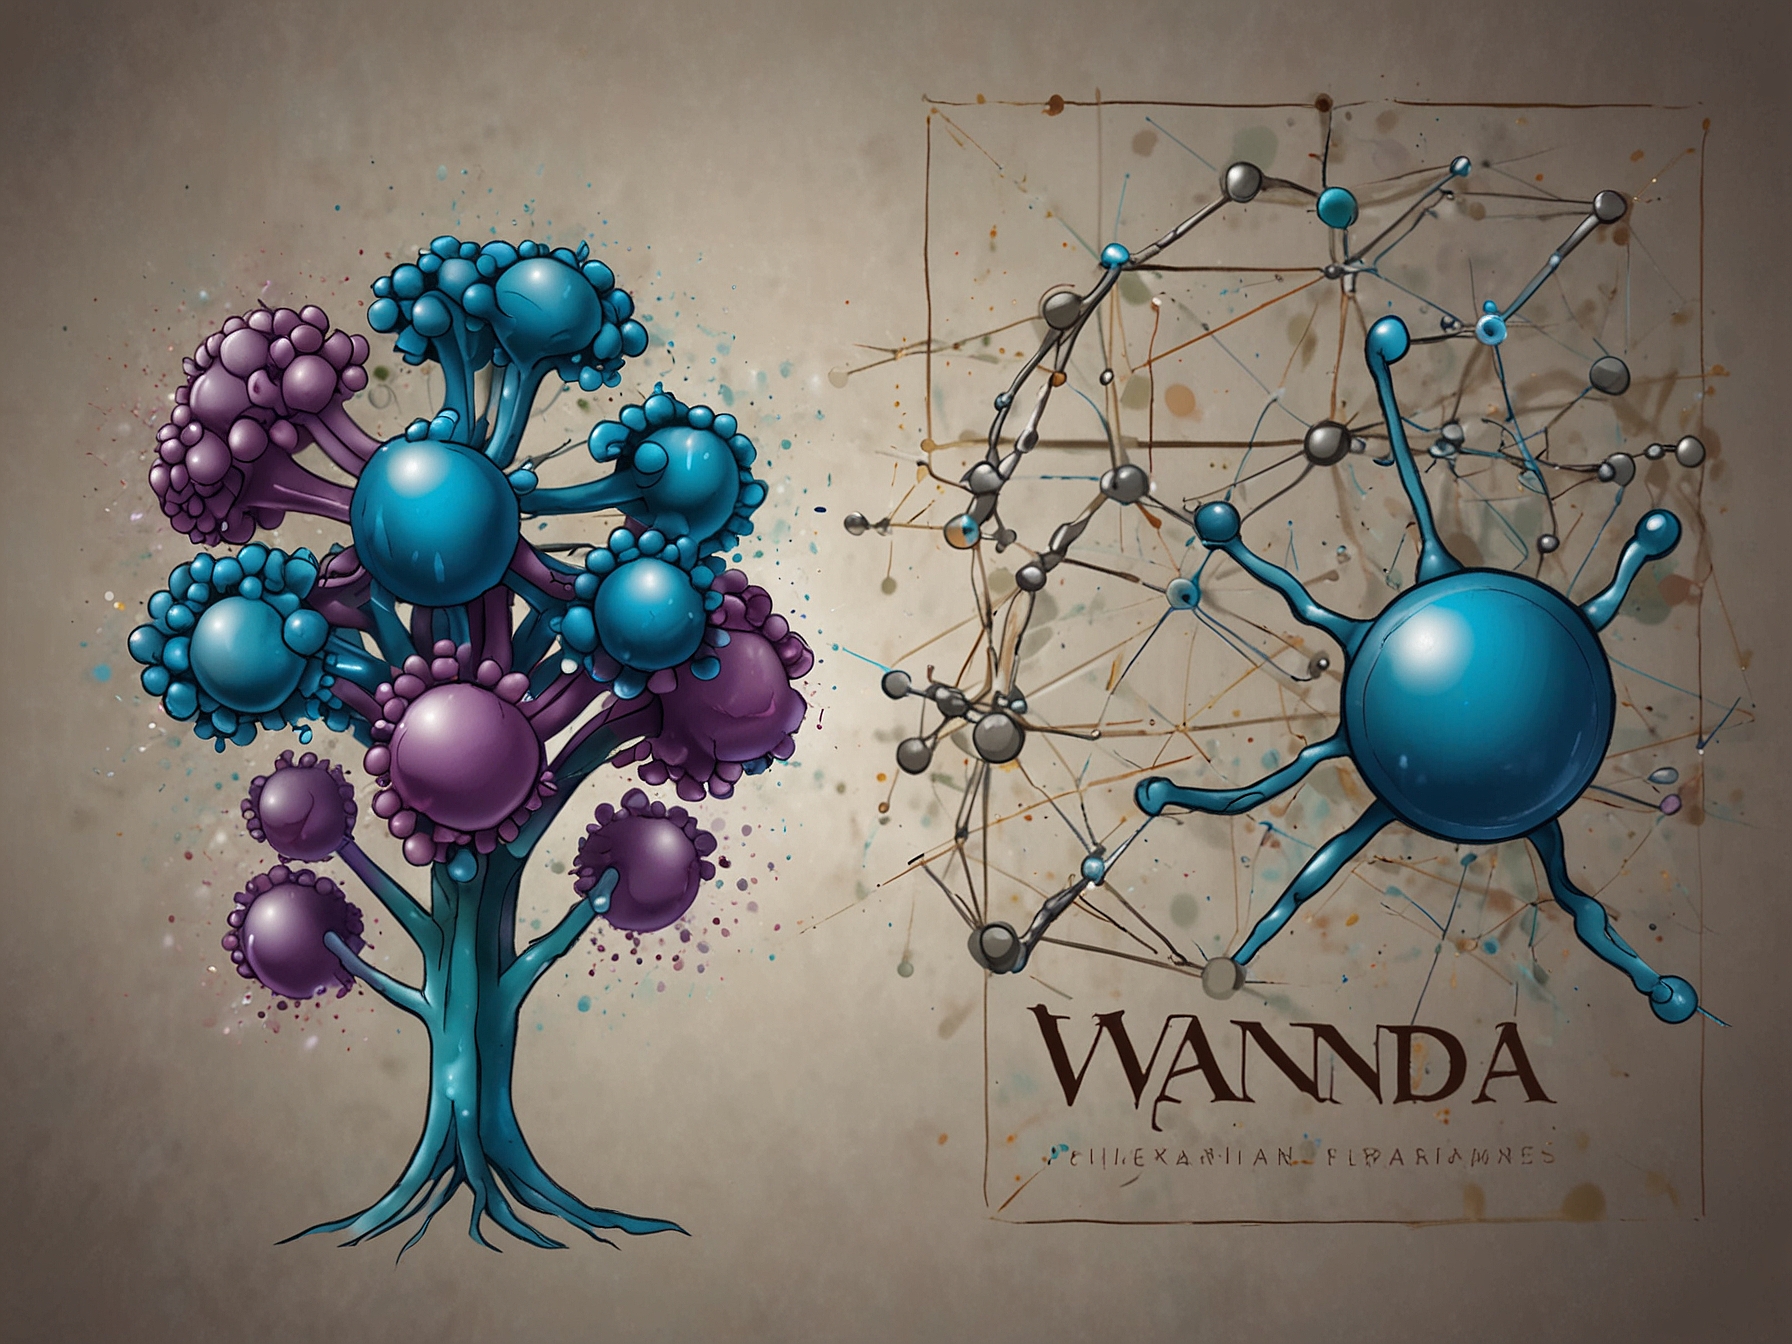 An illustration of Vanda Pharmaceuticals' logo with a background showcasing molecular structures and CNS research to represent their focus on novel therapies for CNS disorders.